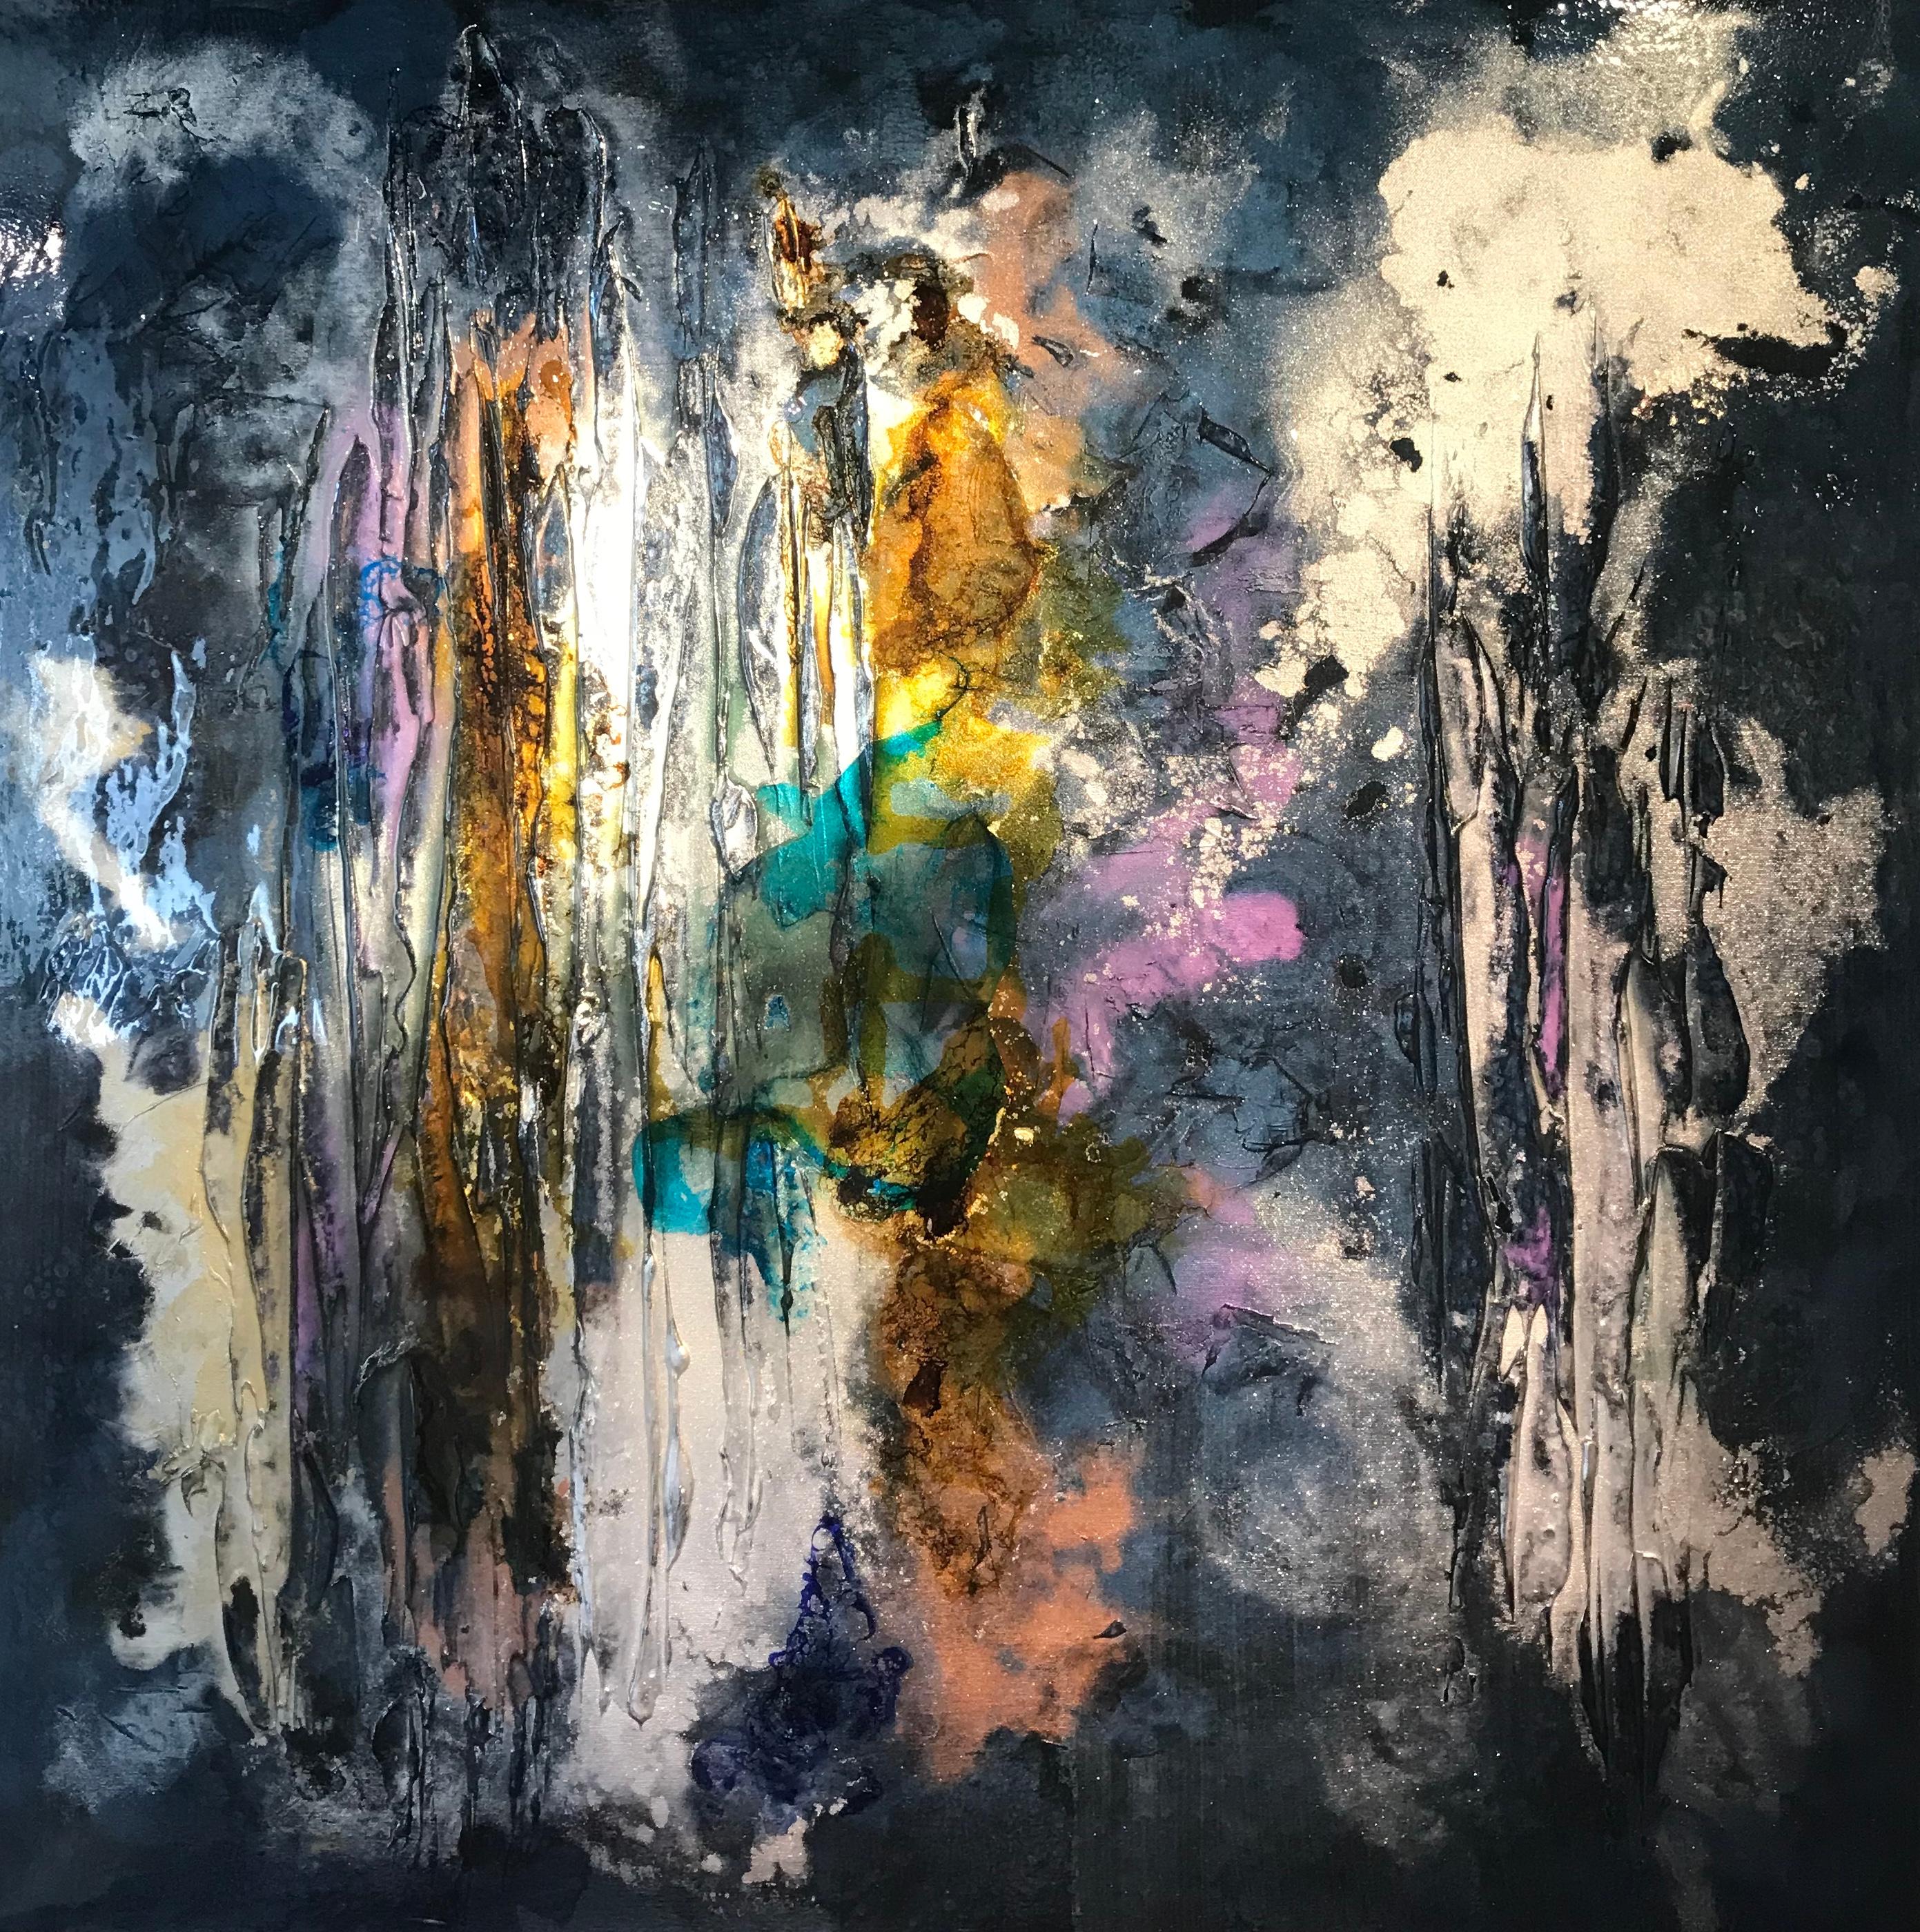 'Beneath the Depths' by Kevin Burton is a beautiful atmospheric contemporary abstract painting. The deep and rich colour palette creates a piece that is energetic and exciting.

The use of mixed media is visually interesting and imaginary.